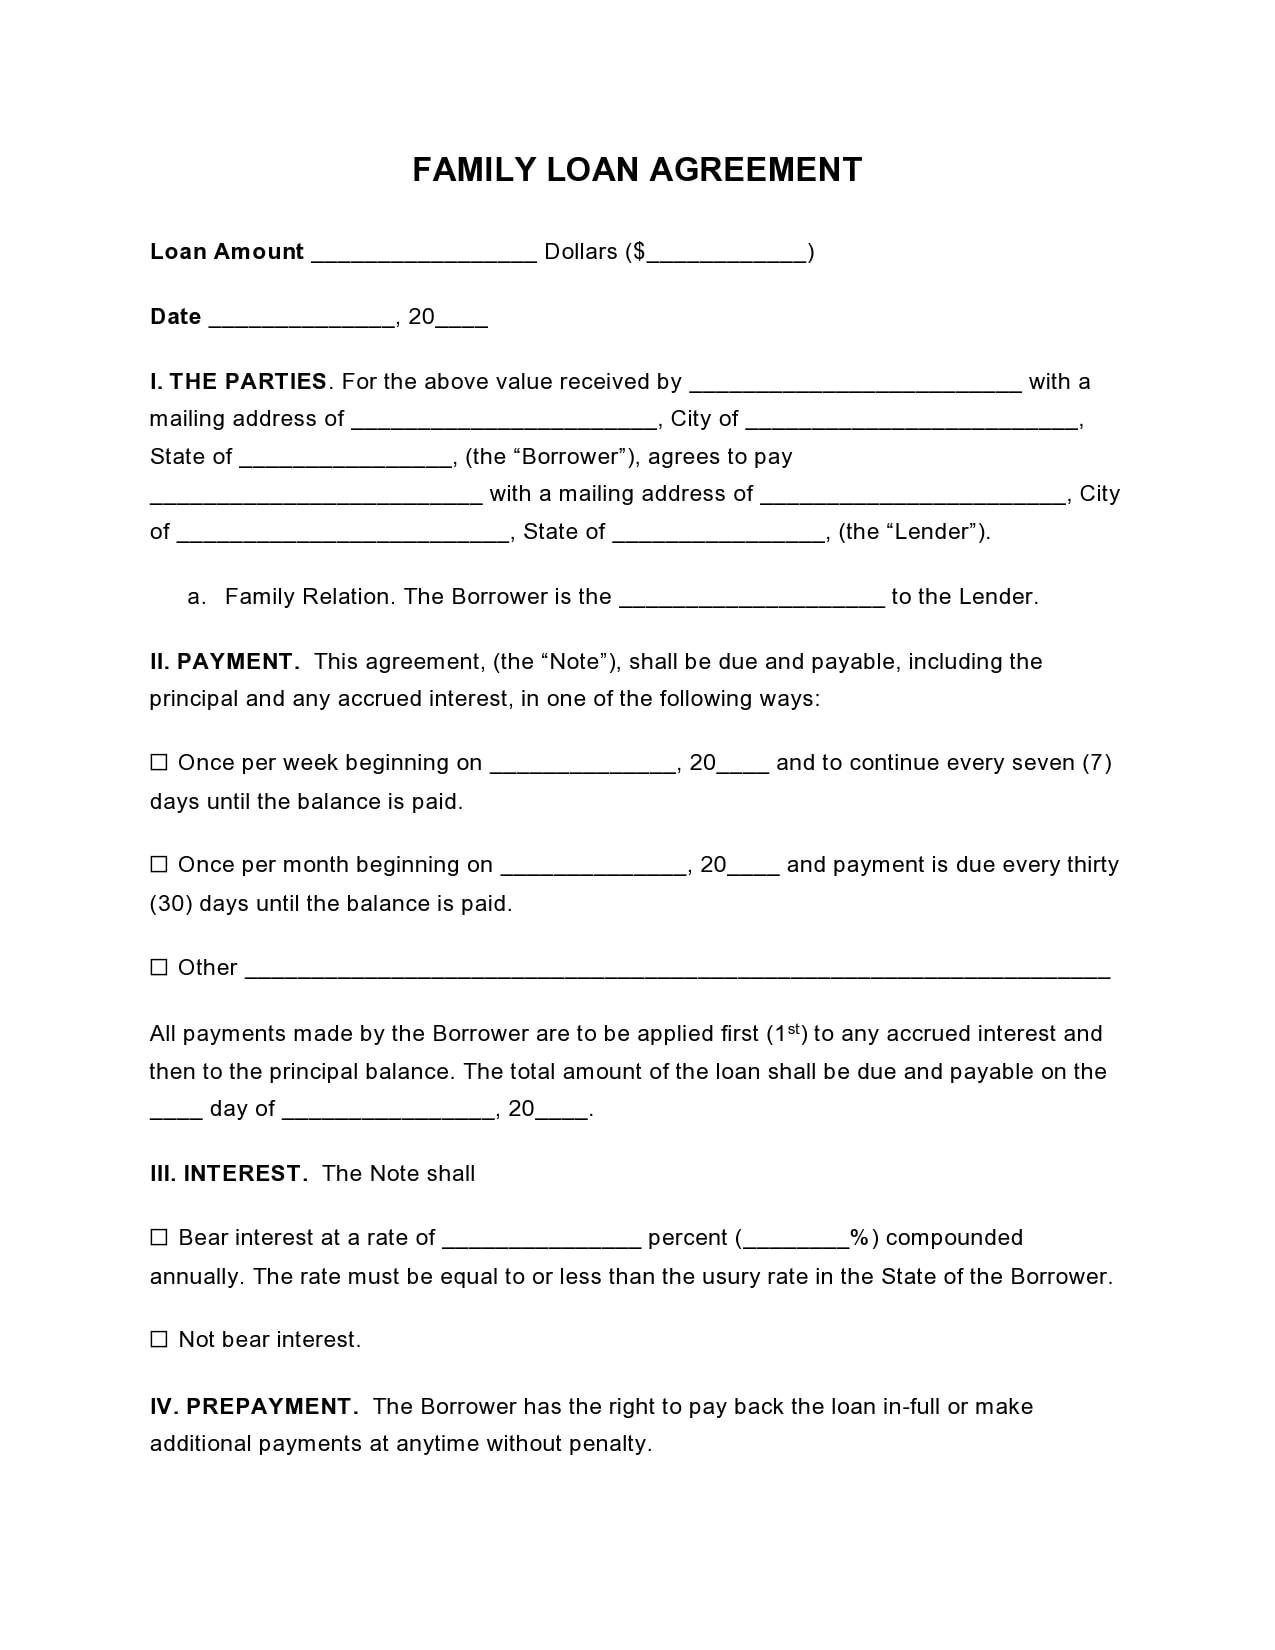 29 Simple Family Loan Agreement Templates 100 Free Parent child loan agreement template